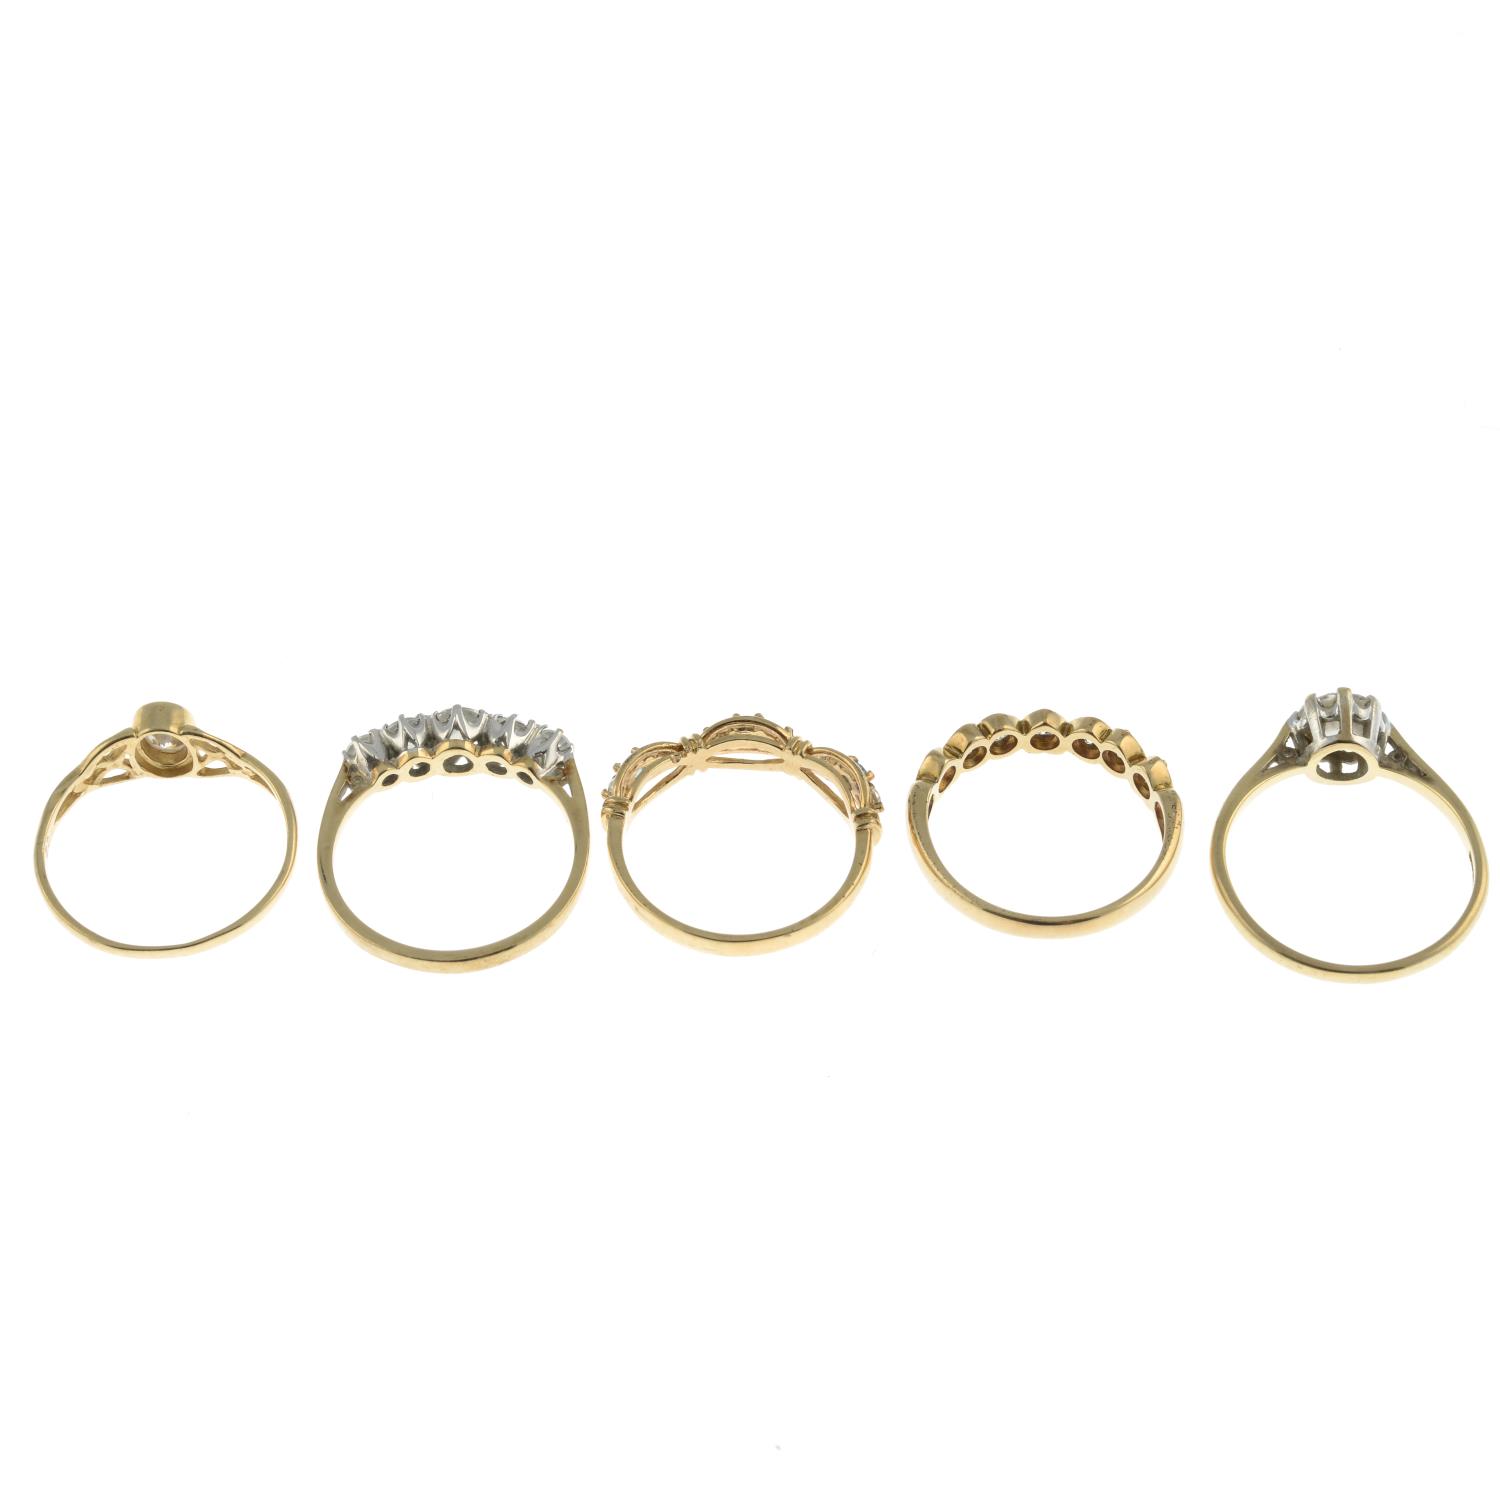 Five 9ct gold cubic zirconia dress rings.Hallmarks for 9ct gold.Ring sizes N1/2 to Q. - Image 2 of 3